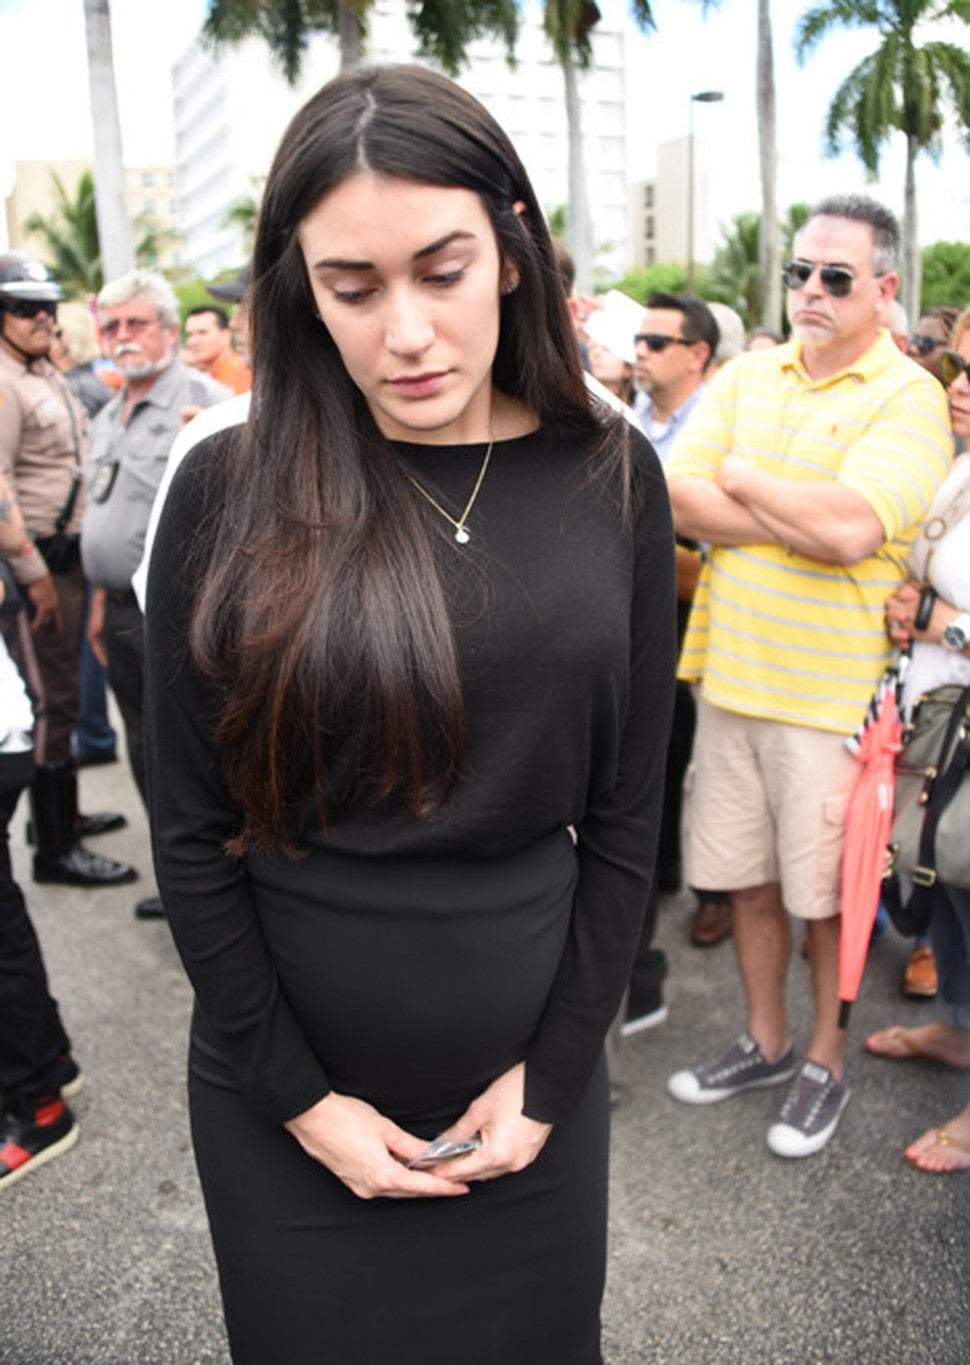 Jose Fernandez's Pregnant Girlfriend Maria Arias Attends Memorial in First  Public Appearance Since His Death